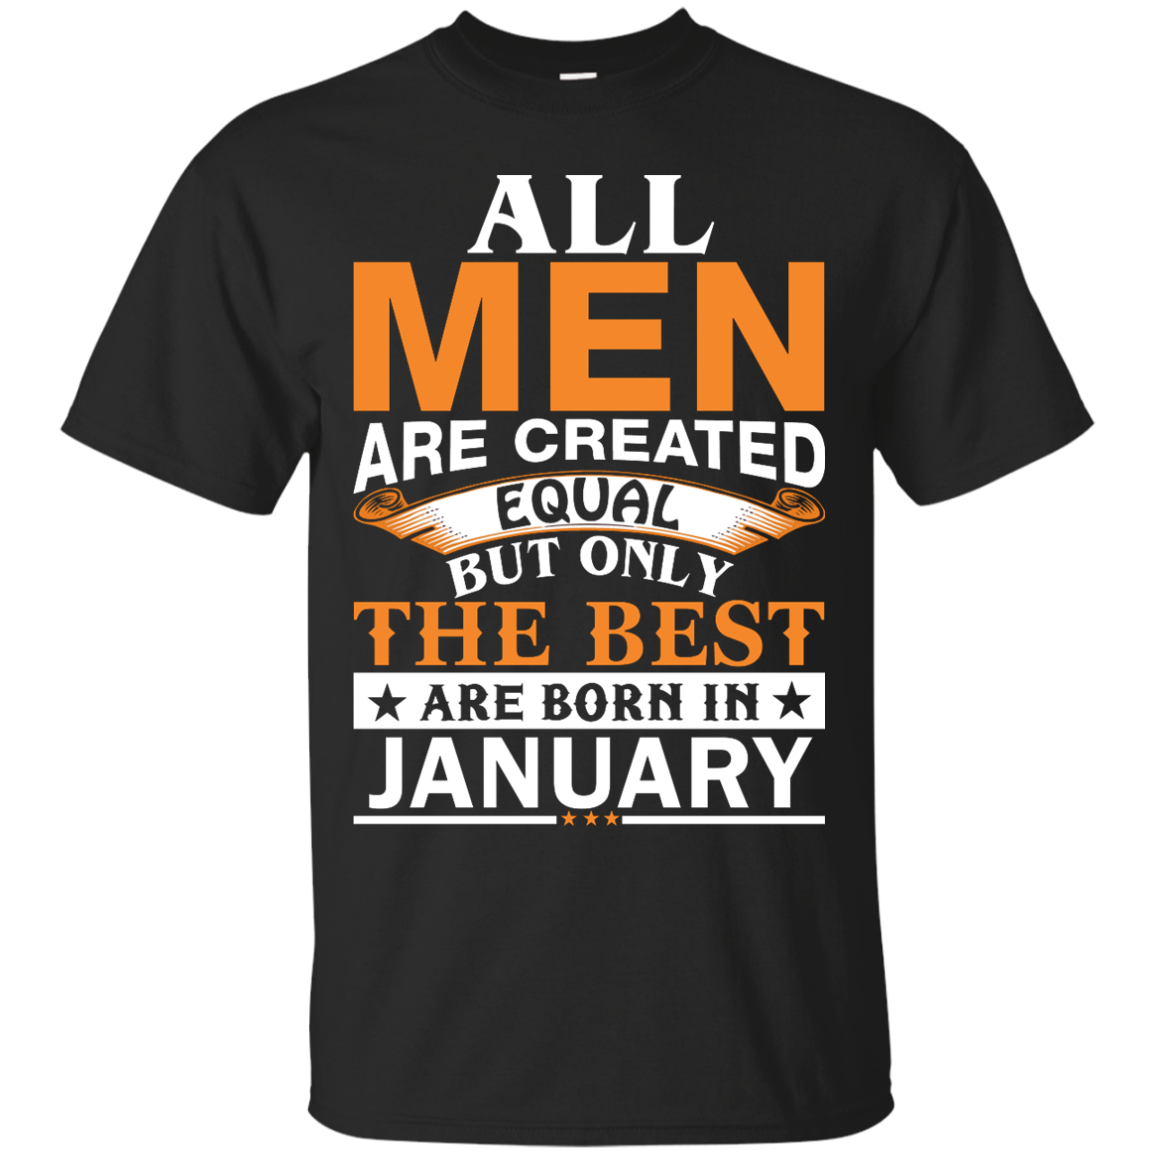 All Men Are Created Equal But Only The Best Are Born in January